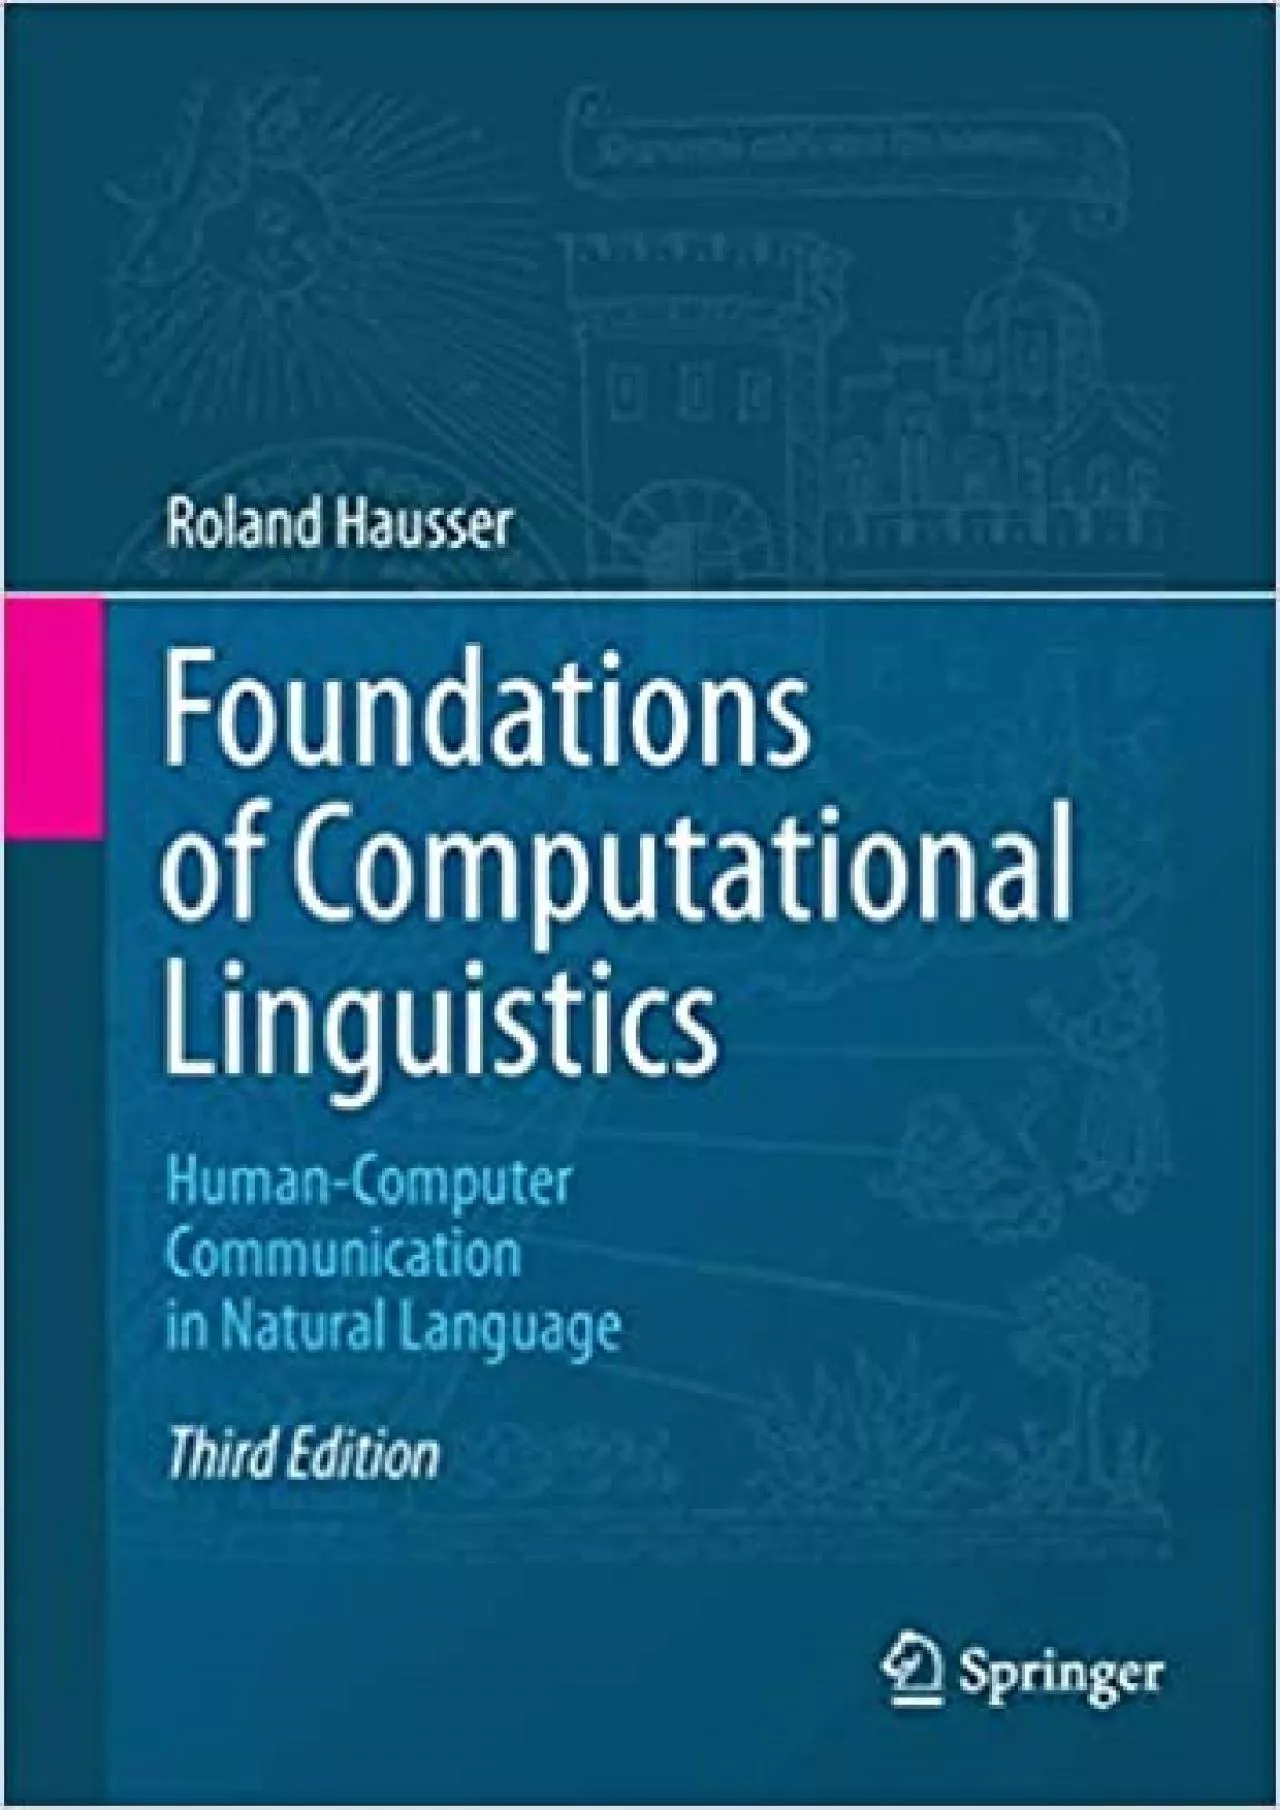 (BOOK)-Foundations of Computational Linguistics Human-Computer Communication in Natural